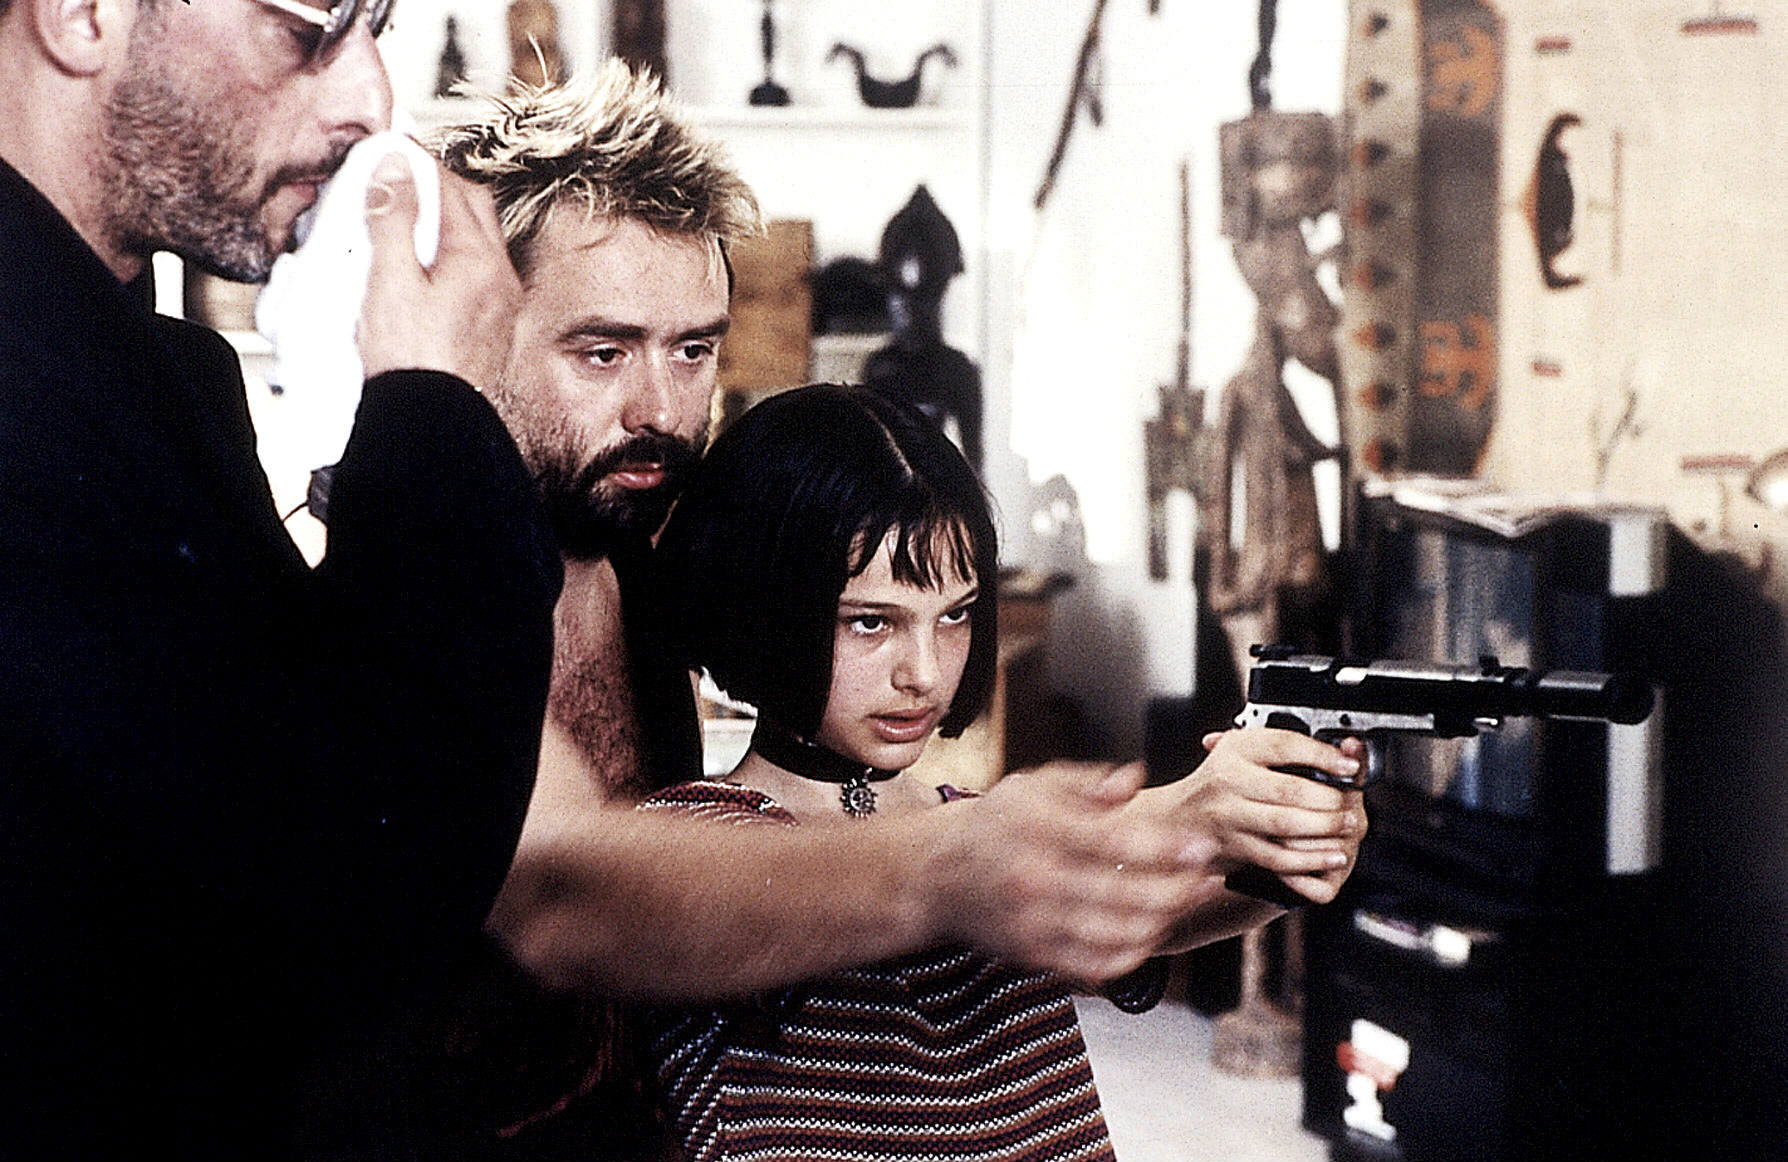 12 year-old Natalie Portman learns how to aim a gun on the set of "The Professional"